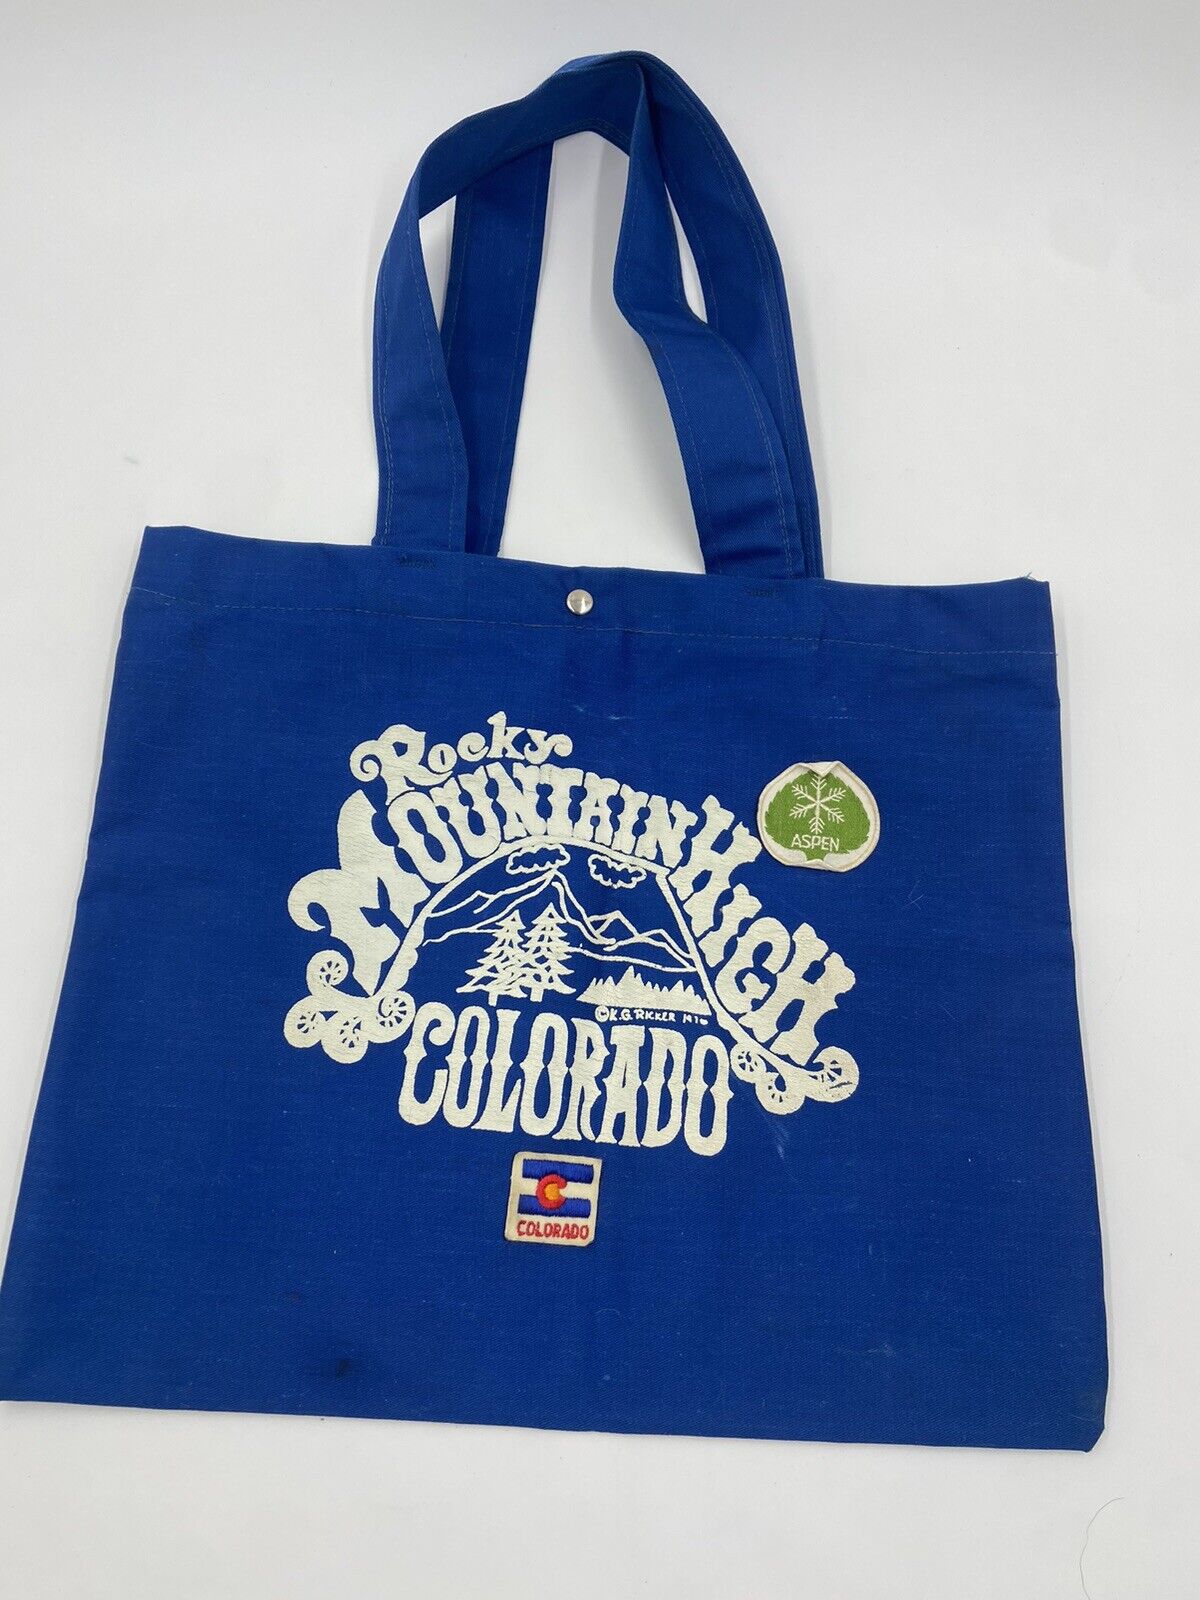 Vintage Rocky Mountain High Aspen Colorado Blue Tote w/ Patches 70’s